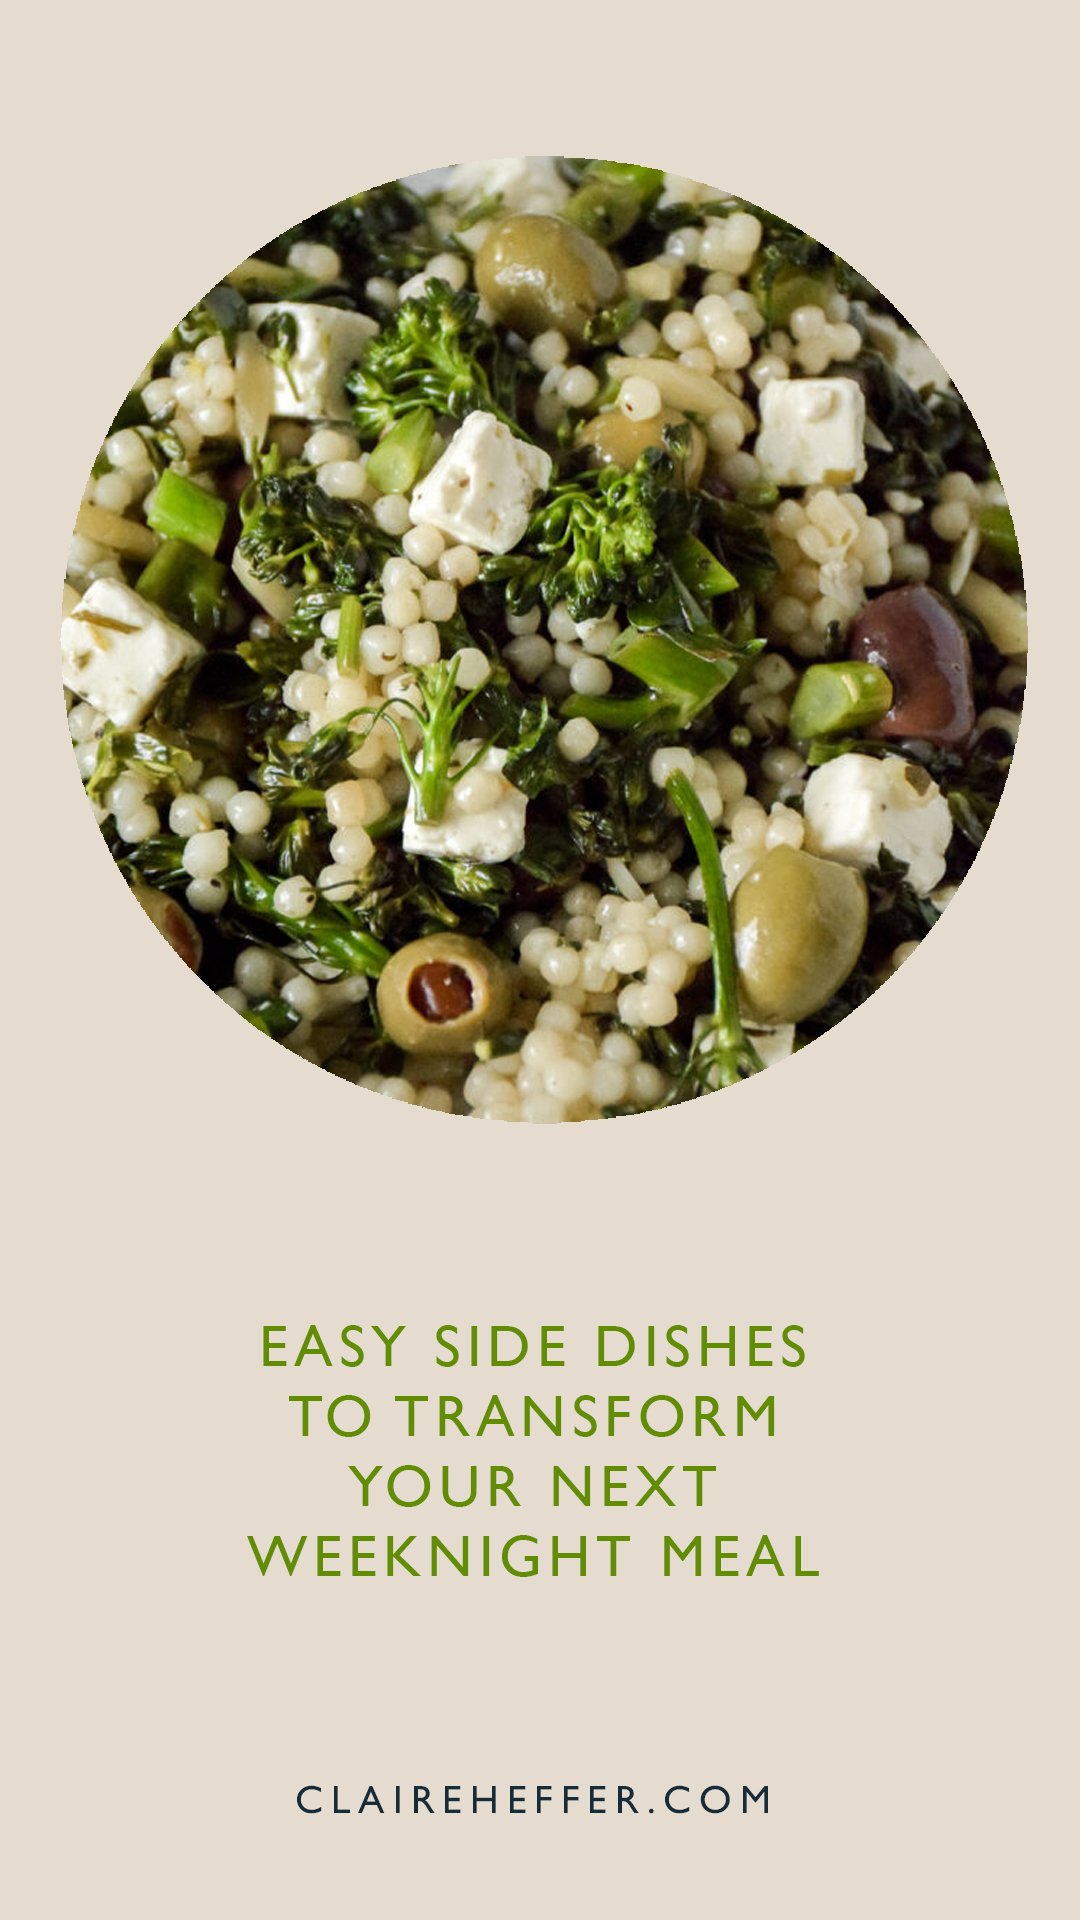  Focus On: Side Dishes, Focus On, Side Dishes, Quick Healthy Side Dishes, Side Dishes To Inspire Your Next Meal, Healthy Side Dishes, Side Dish Inspiration For Your Next Meal, Side Dish Inspiration, Mix Up Your Weeknight Dinners, Side Dishes To Mix U